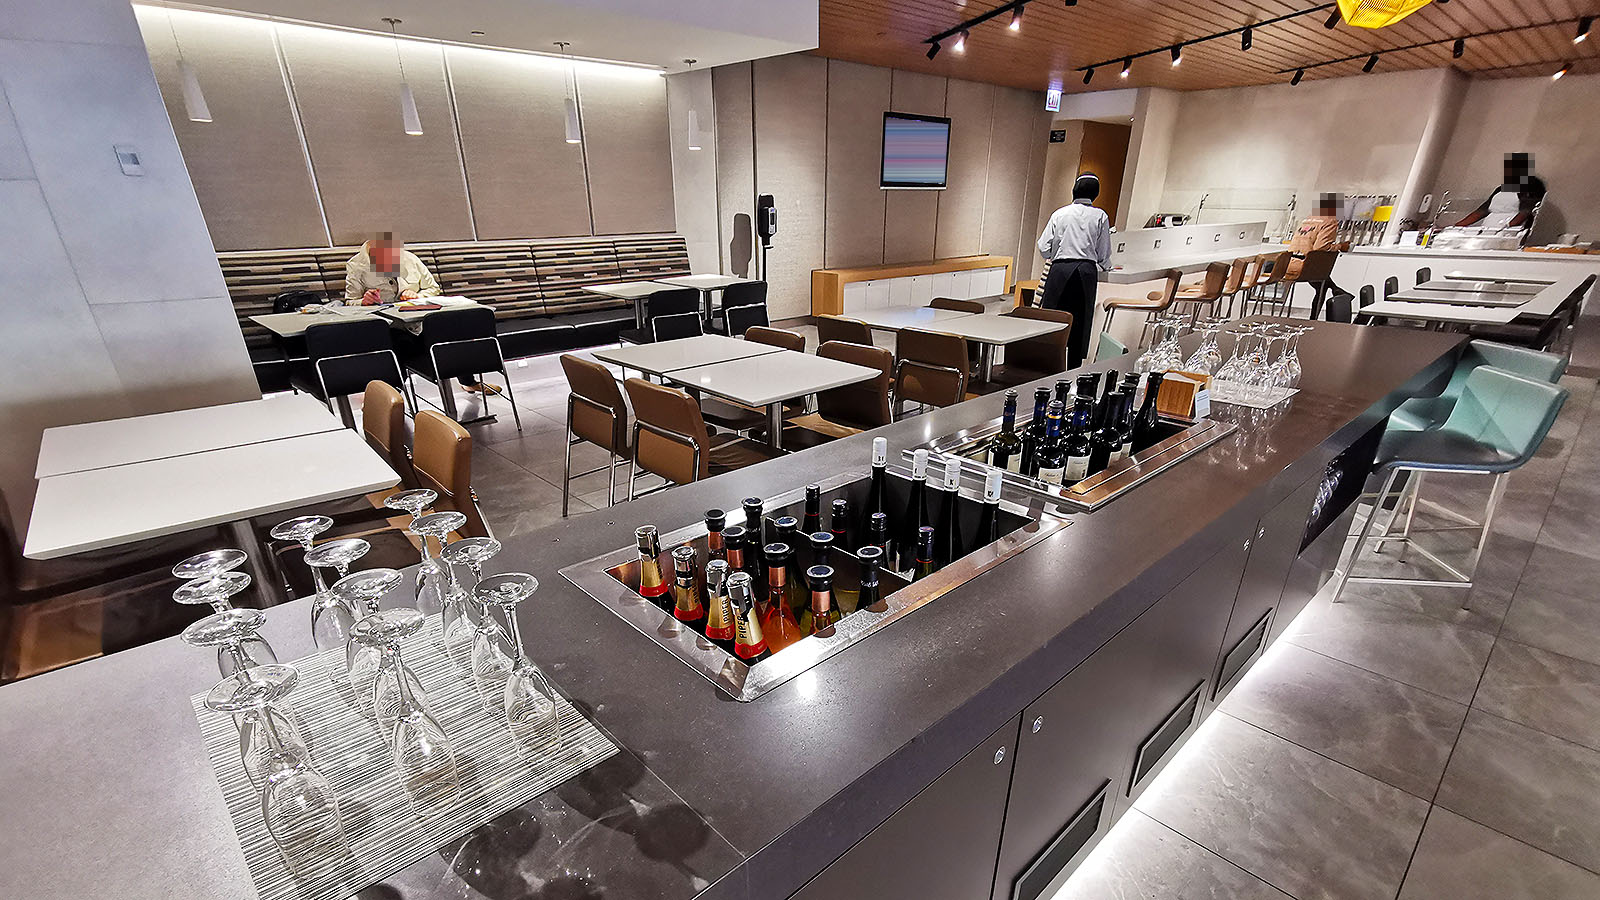 Wine and seating at AA's Flagship Lounge in Chicago